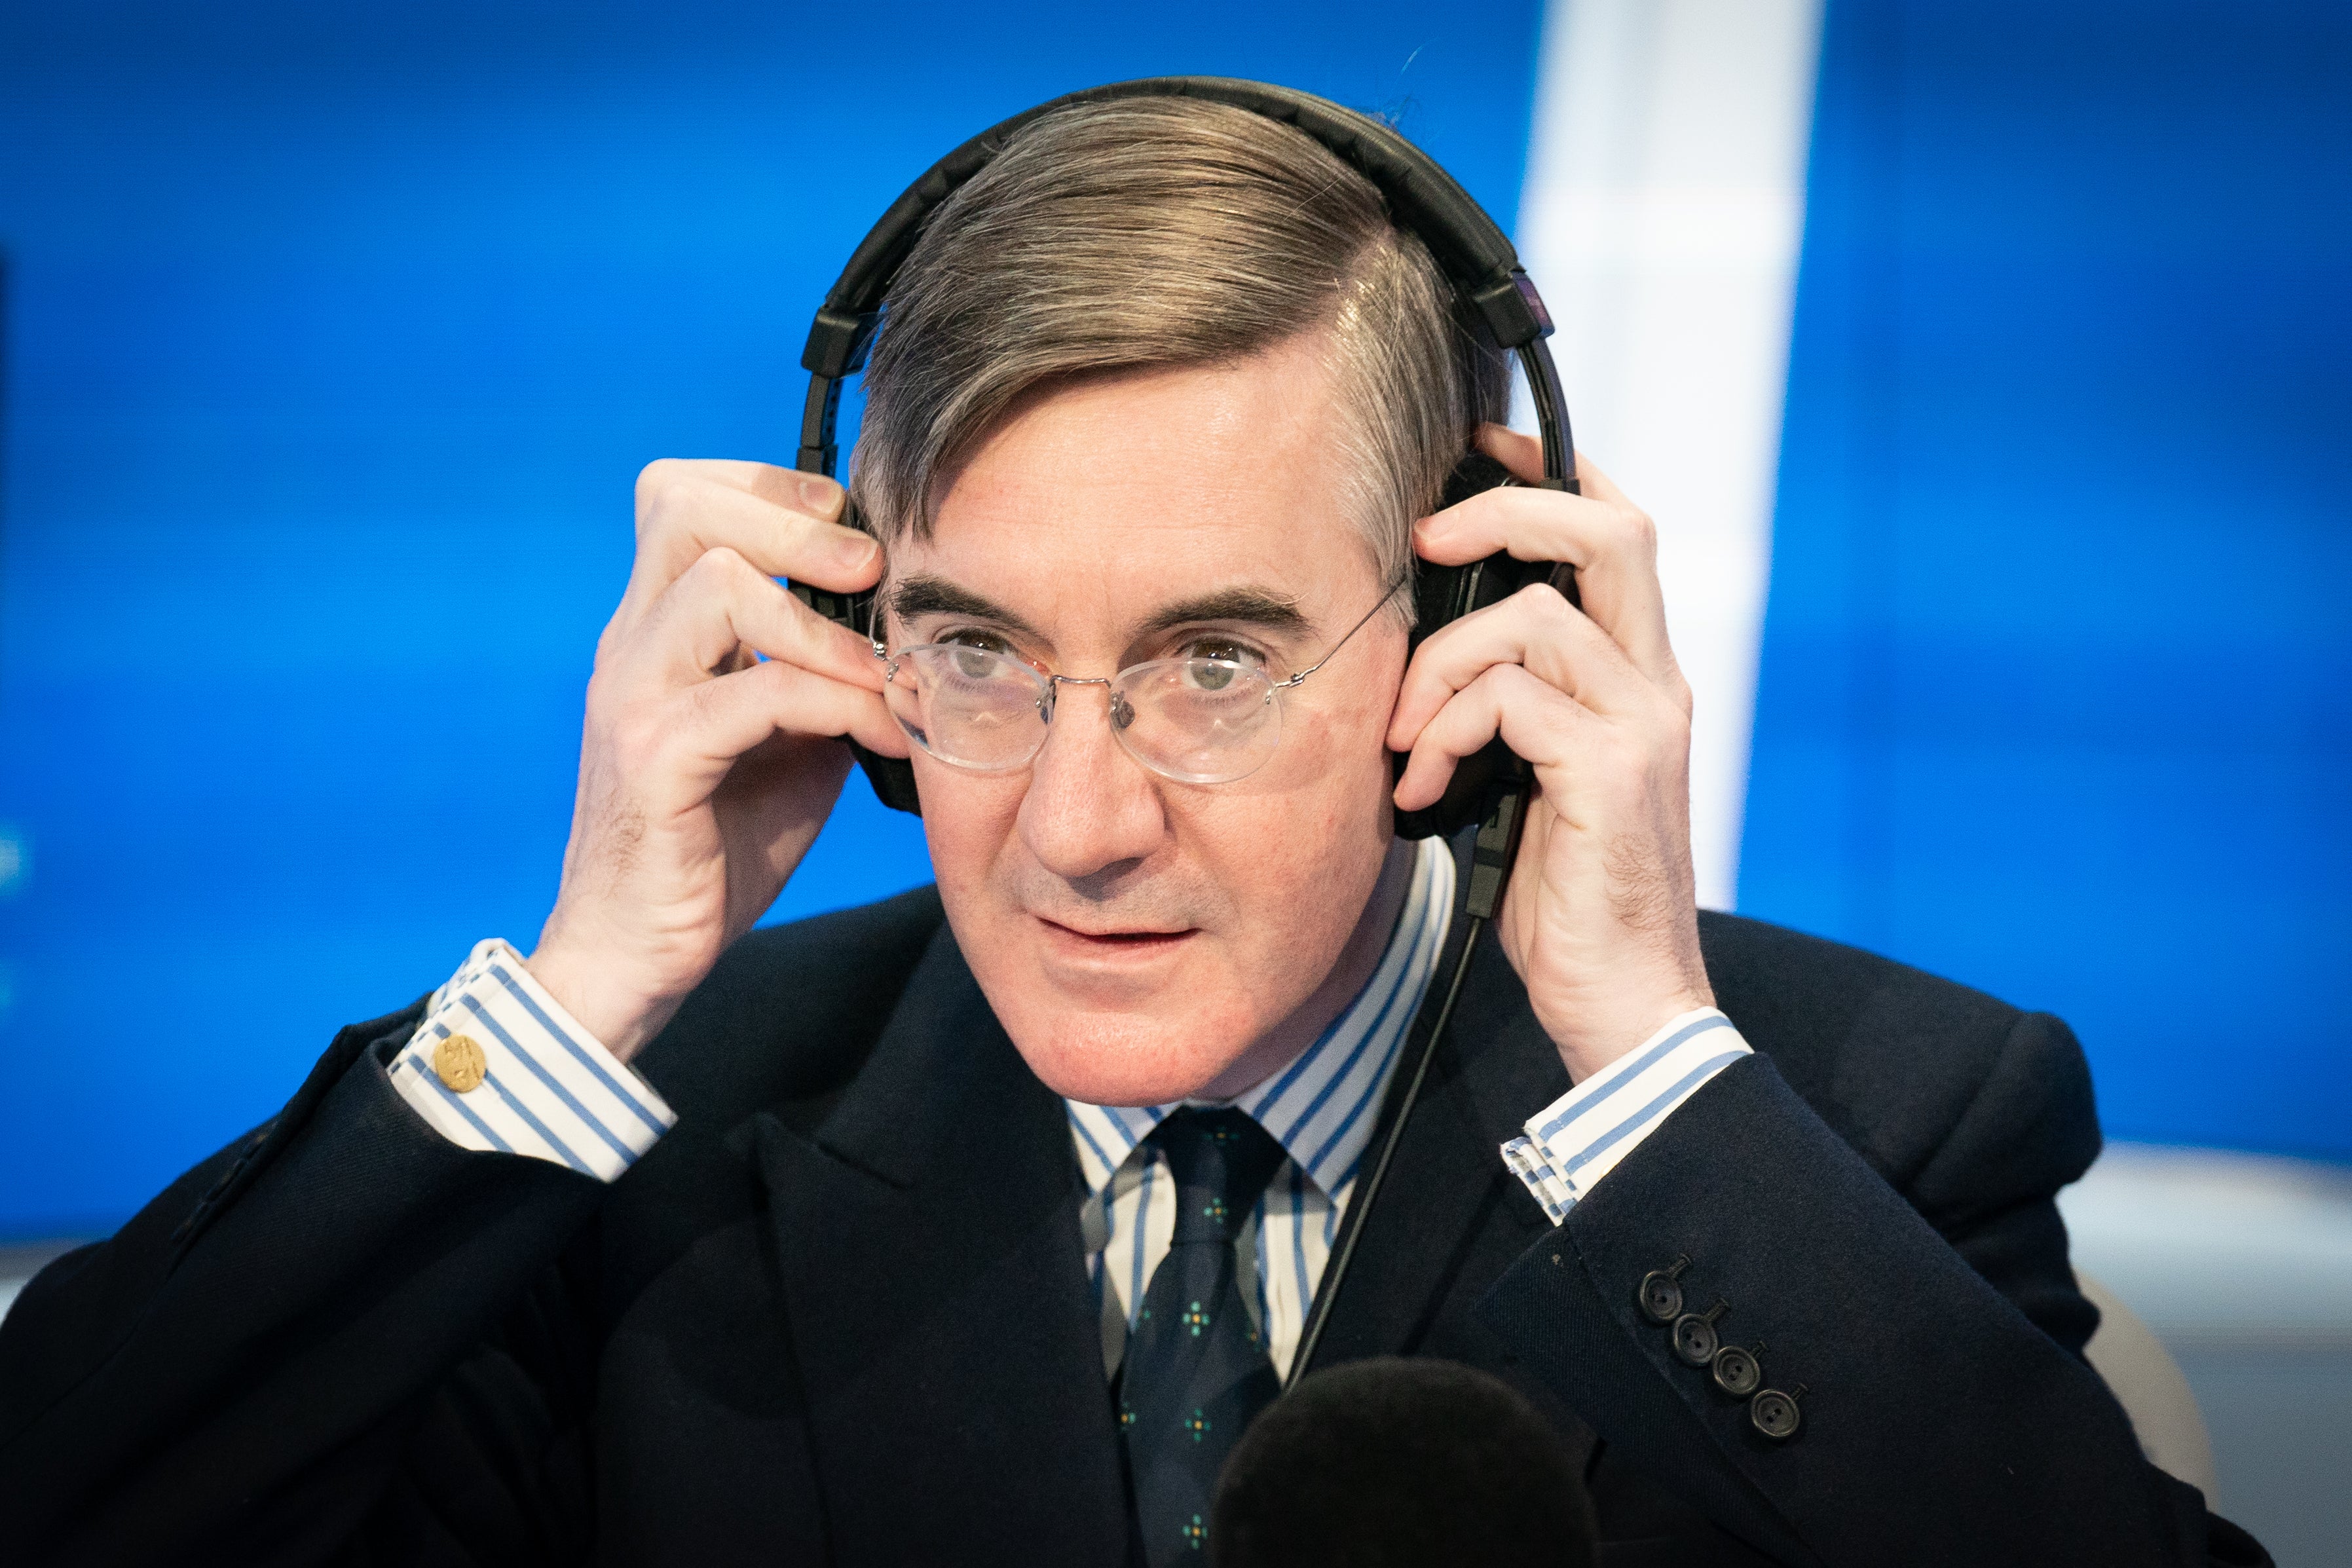 Jacob Rees-Mogg has said the EU is trying to punish the UK for Brexit through the NI Protocol (Stefan Rousseau/PA)